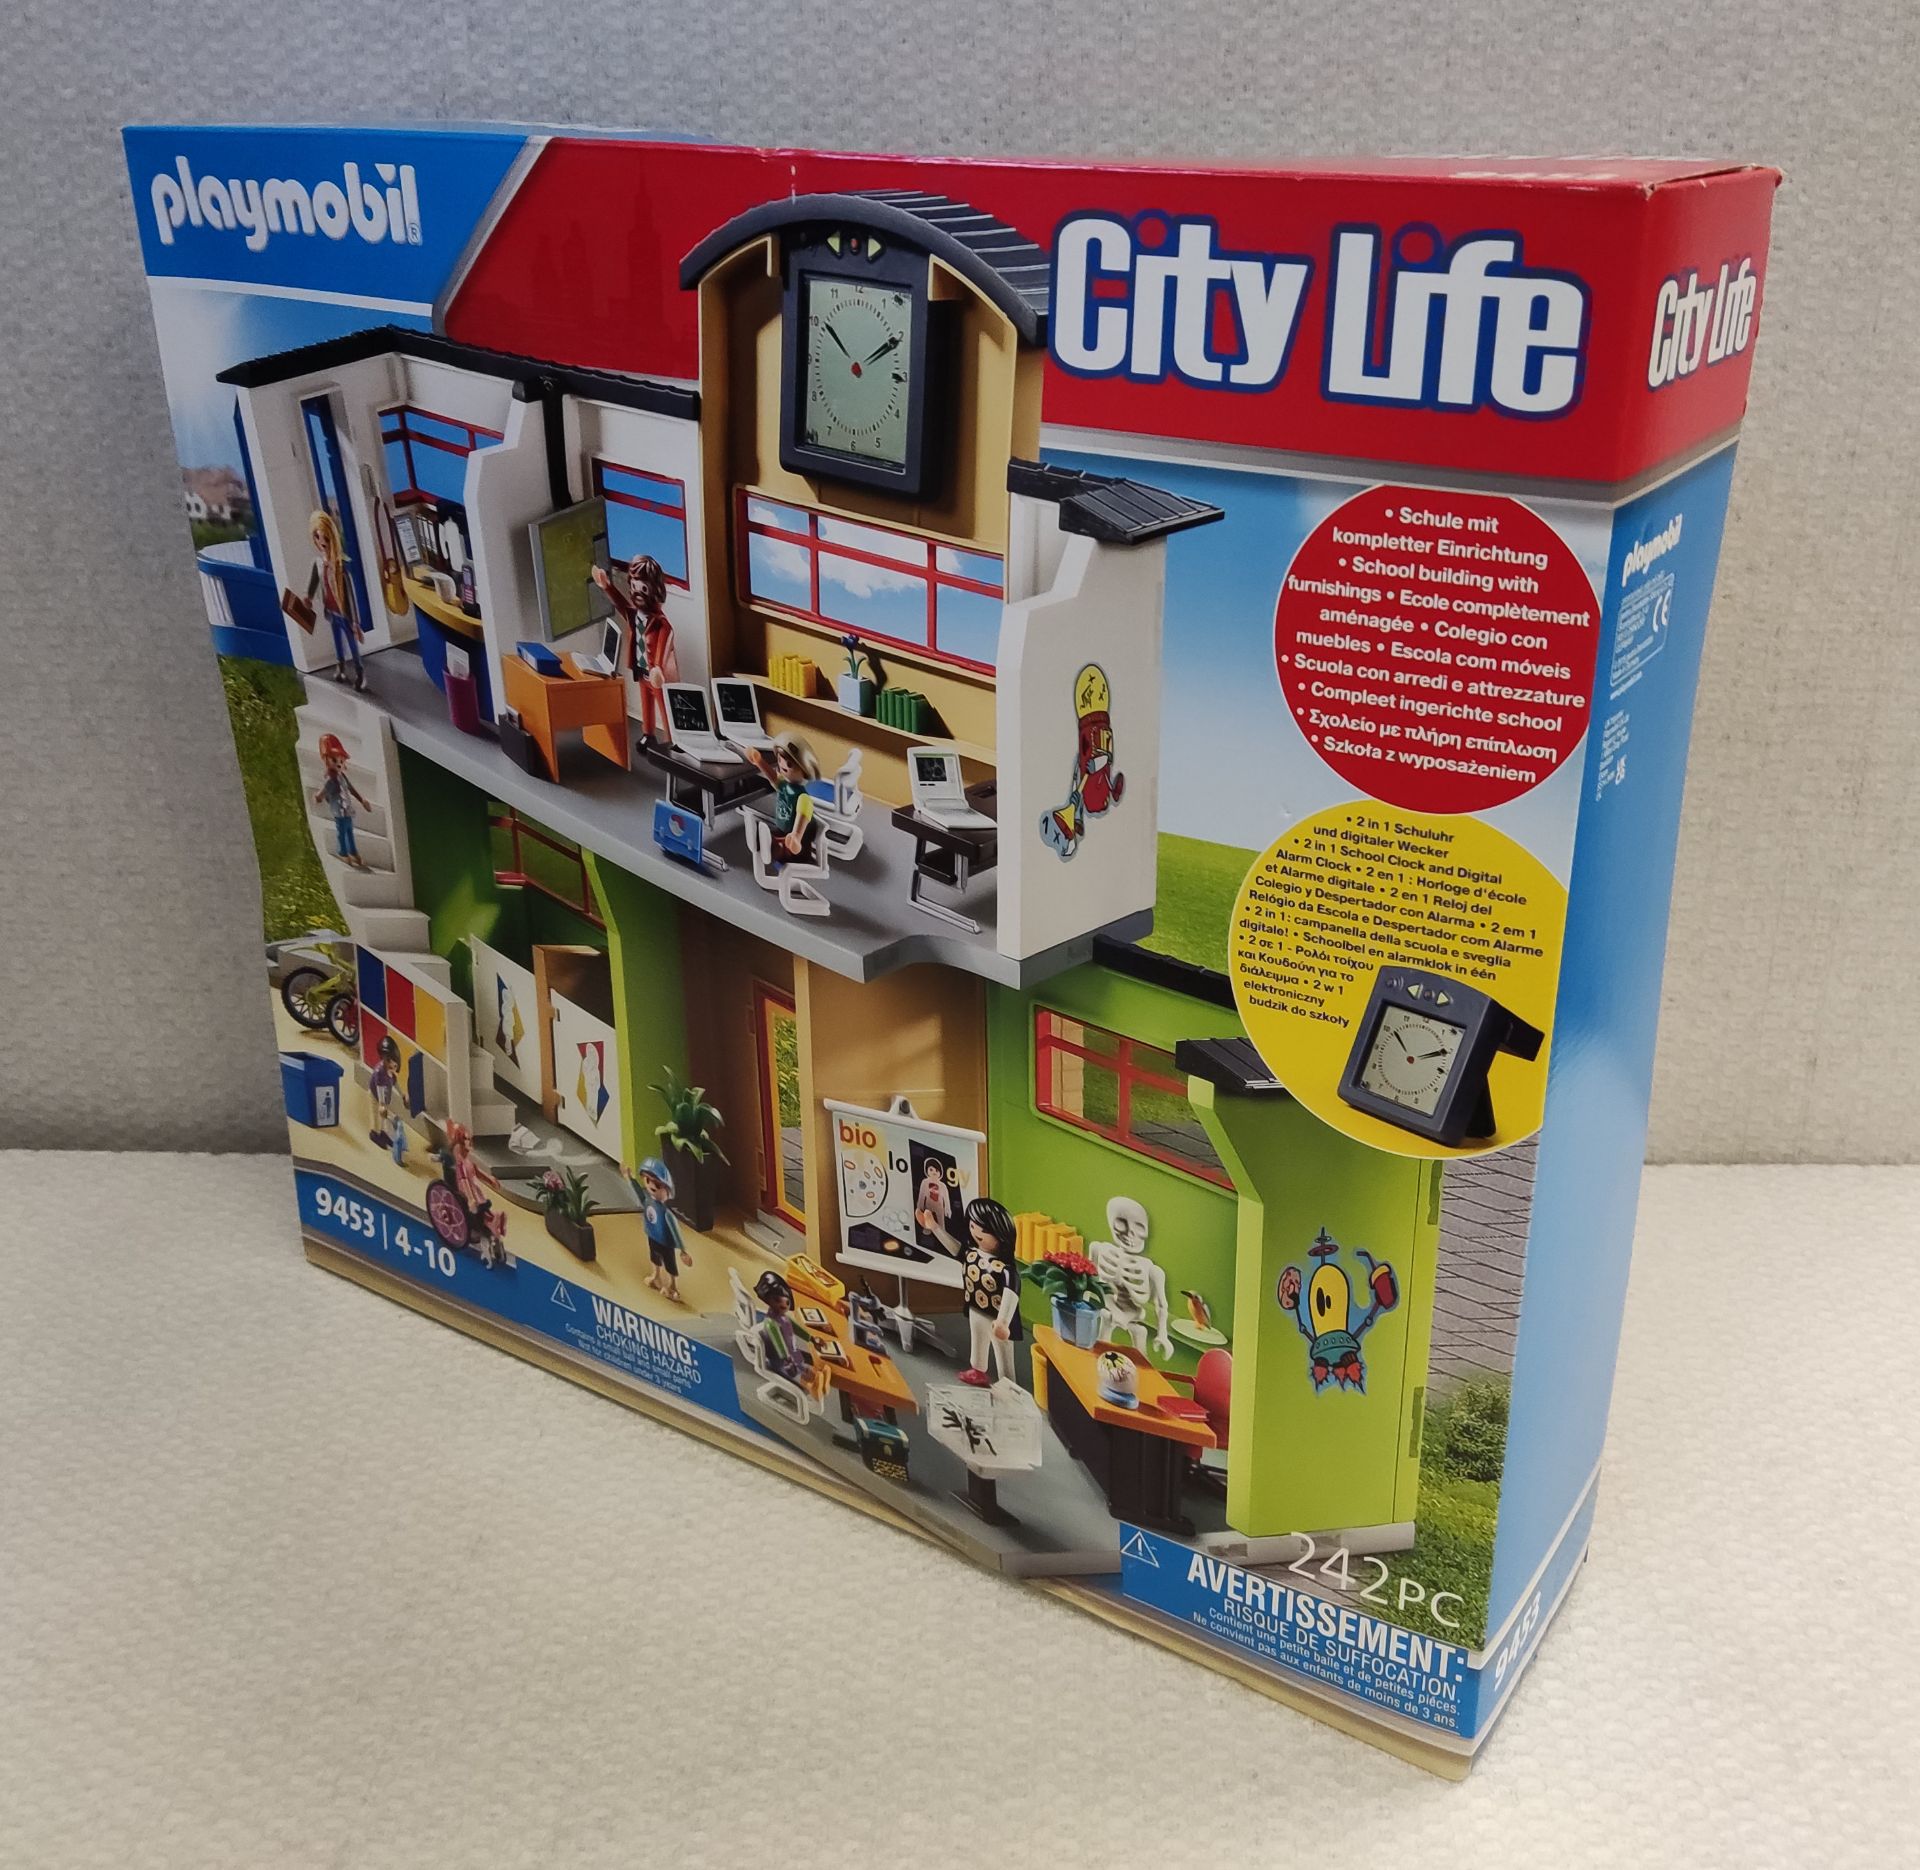 1 x Playmobil City Life School Building With Furnishings - Model 9453 - New/Boxed - Image 4 of 5